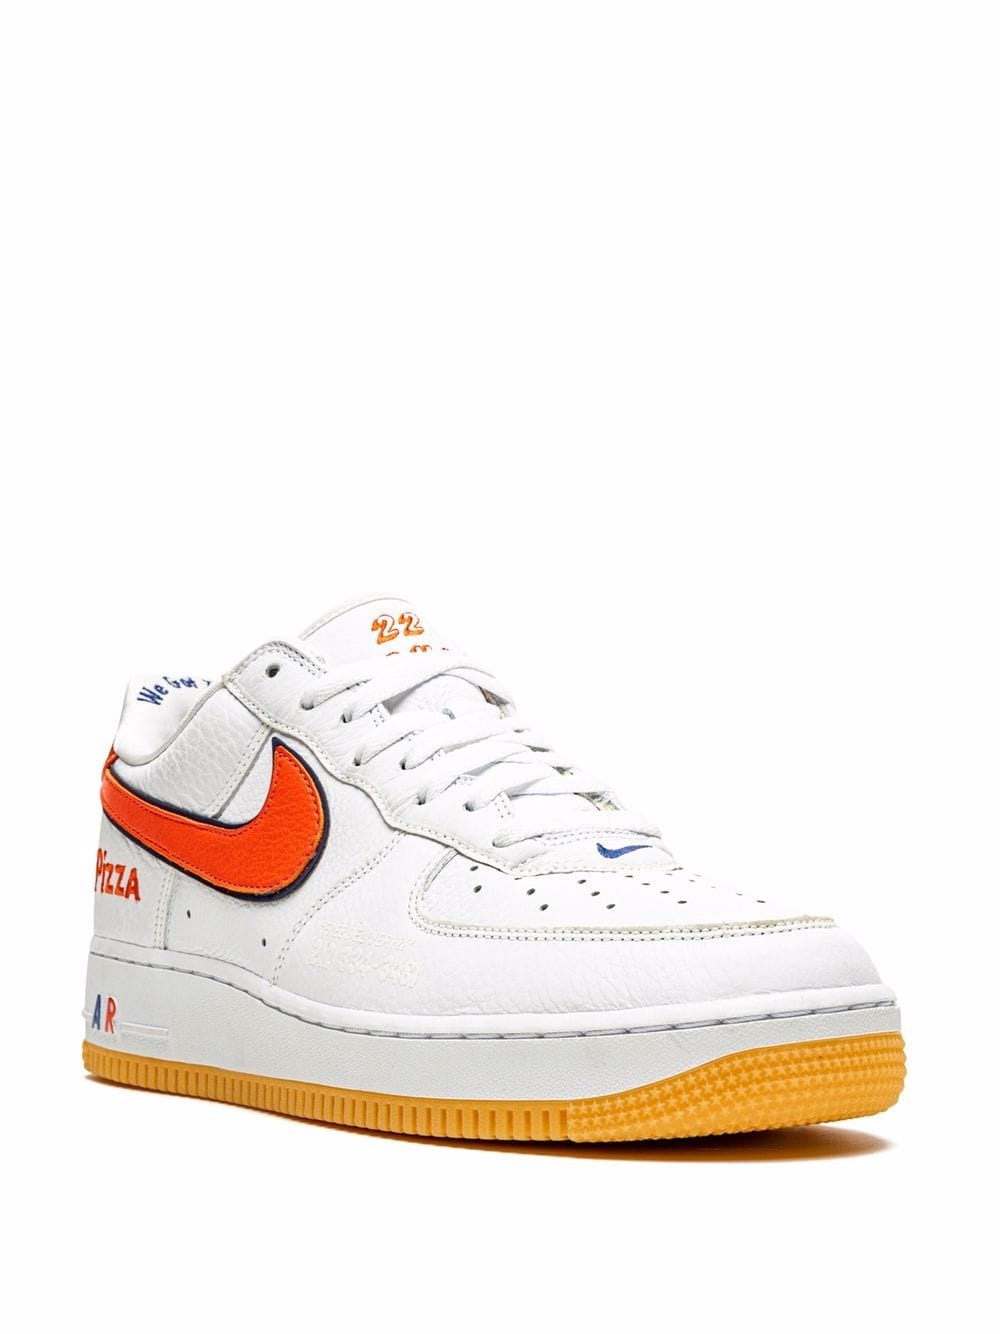 Nike x Scarr's Pizza Air Force 1 Low Sneakers - Farfetch